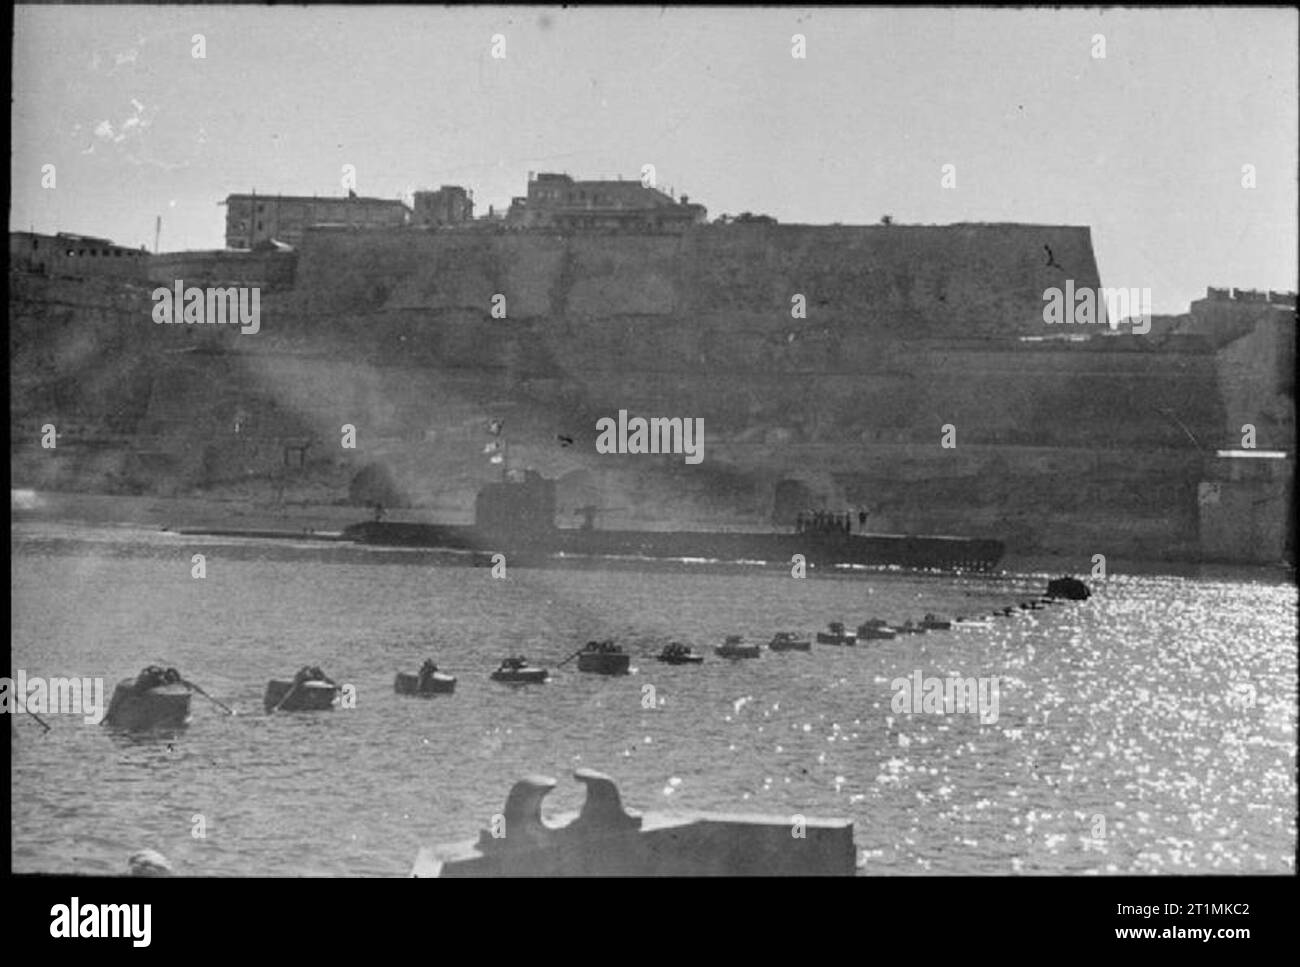 The Royal Navy during the Second World War HMS UNRUFFLED returning to harbour in Malta after a patrol in the Mediterranean where she supported the Allied victories in North Africa, Sicily and Italy. Here the submarine is just making its way past the boom. The ancient walls of the harbour are towering down on UNRUFFLED. Stock Photo